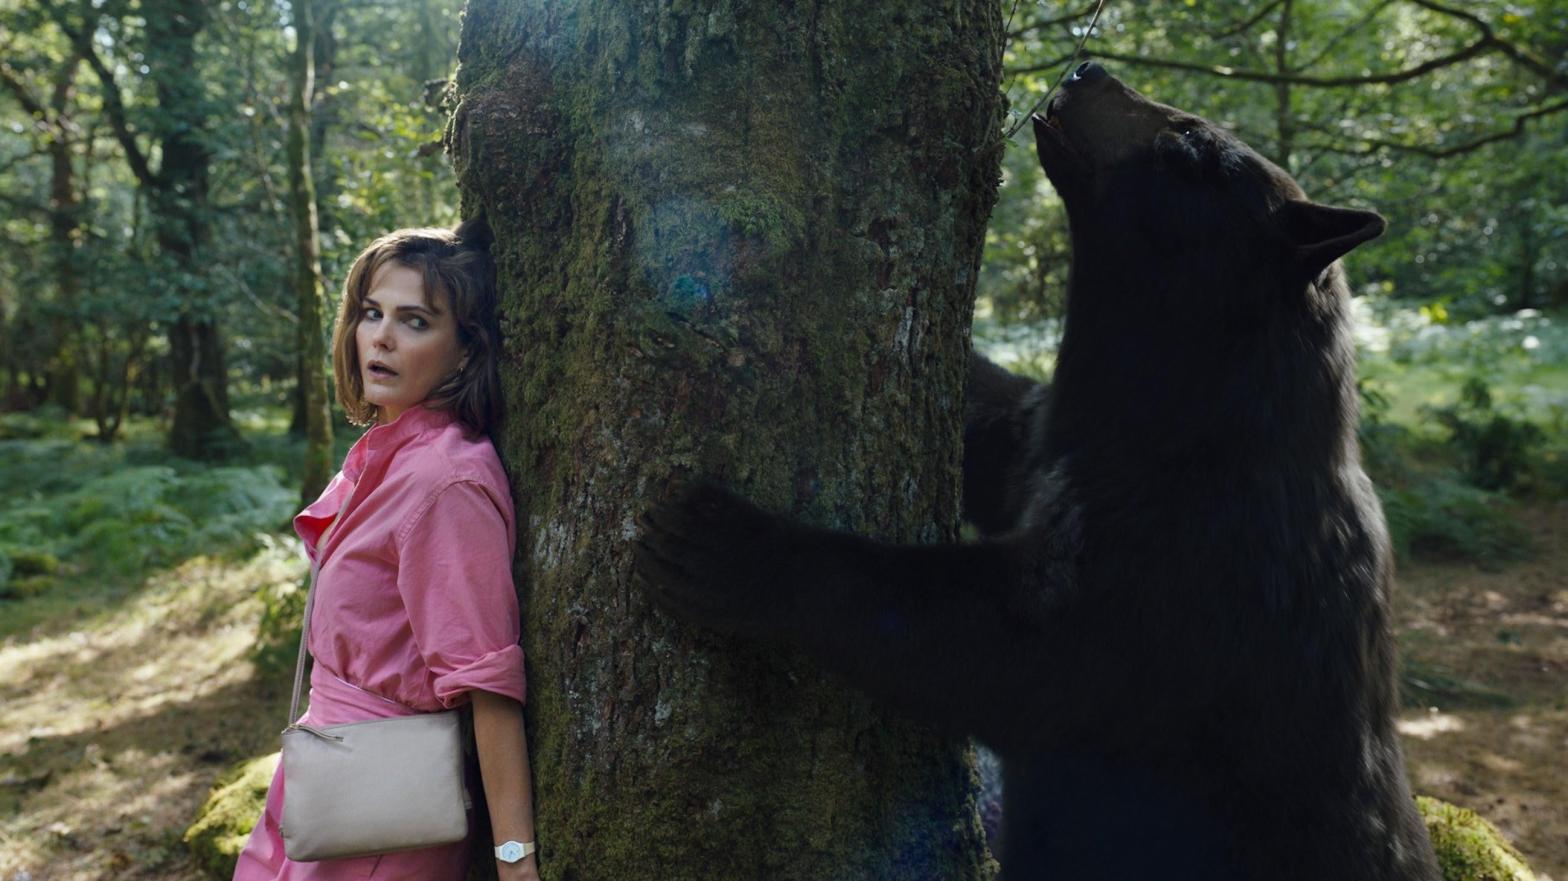 Keri Russell and the titular star of Cocaine Bear. (Image: Universal)